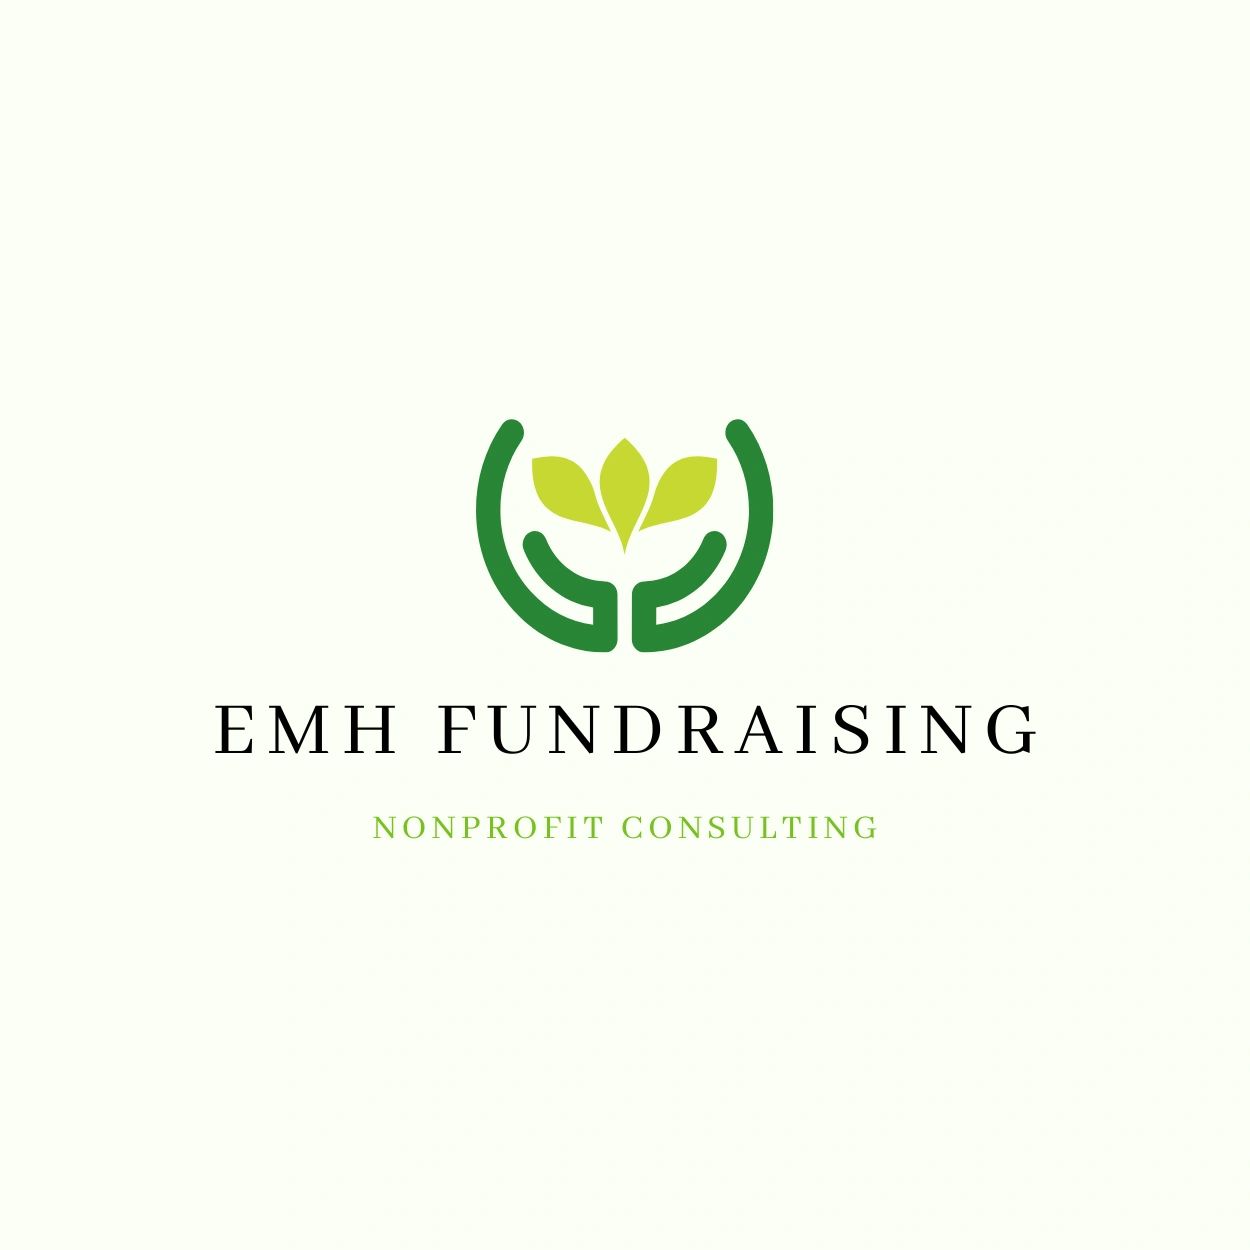 Hands holding a growing plant with the text "Emh Fundraising. Nonprofit Consulting."